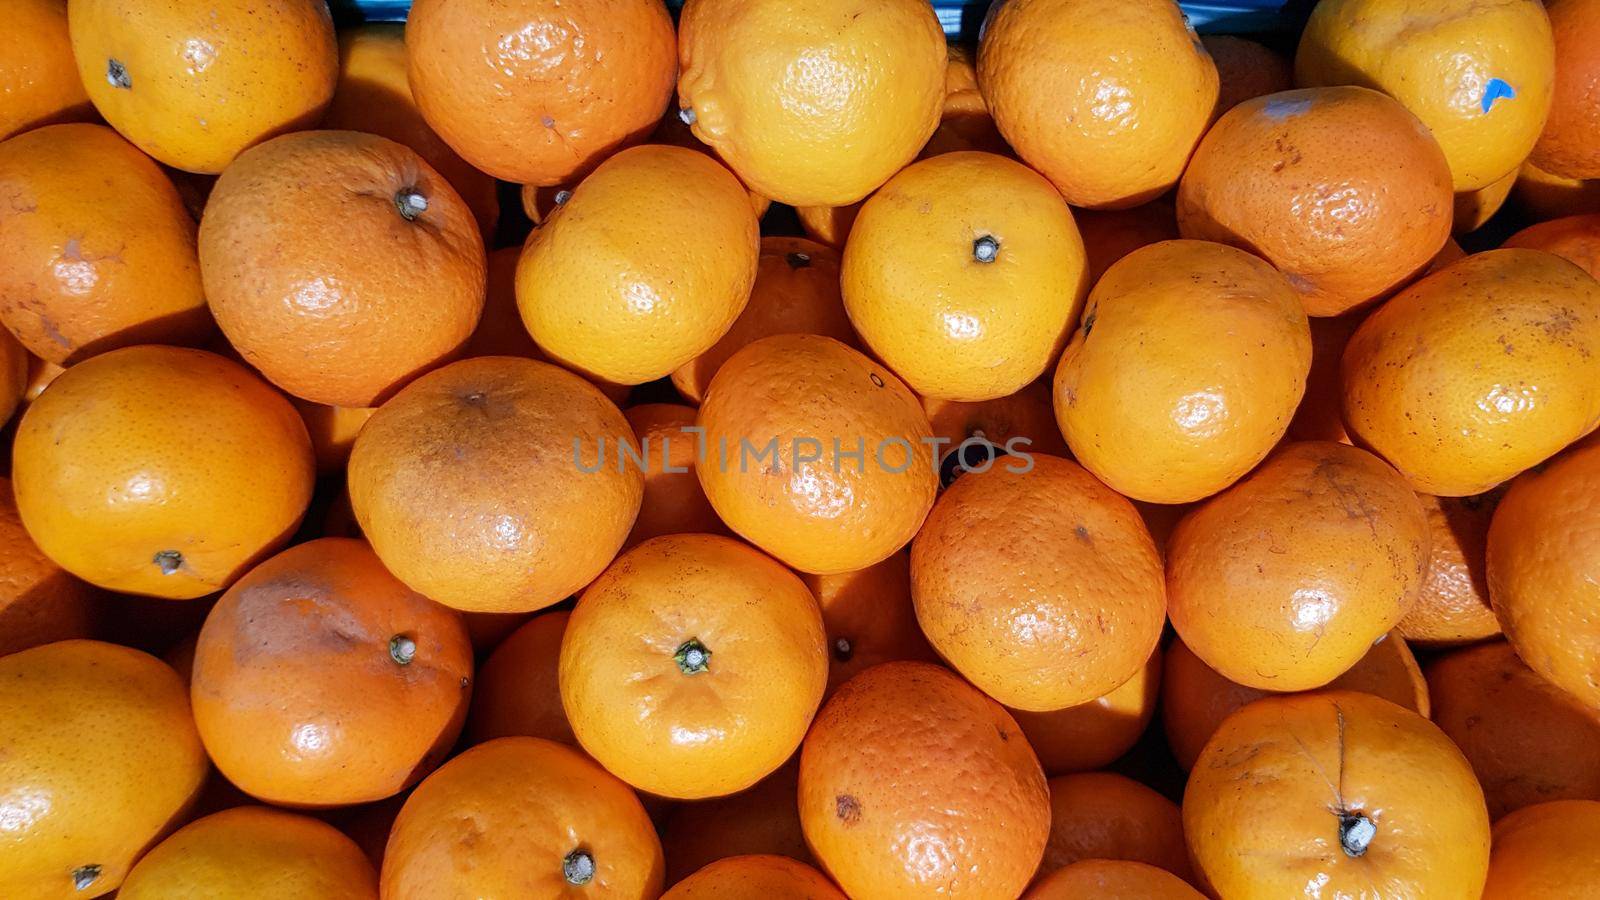 Many oranges are placed in trays for sale to customers. in a shop in Thailand by pichai25